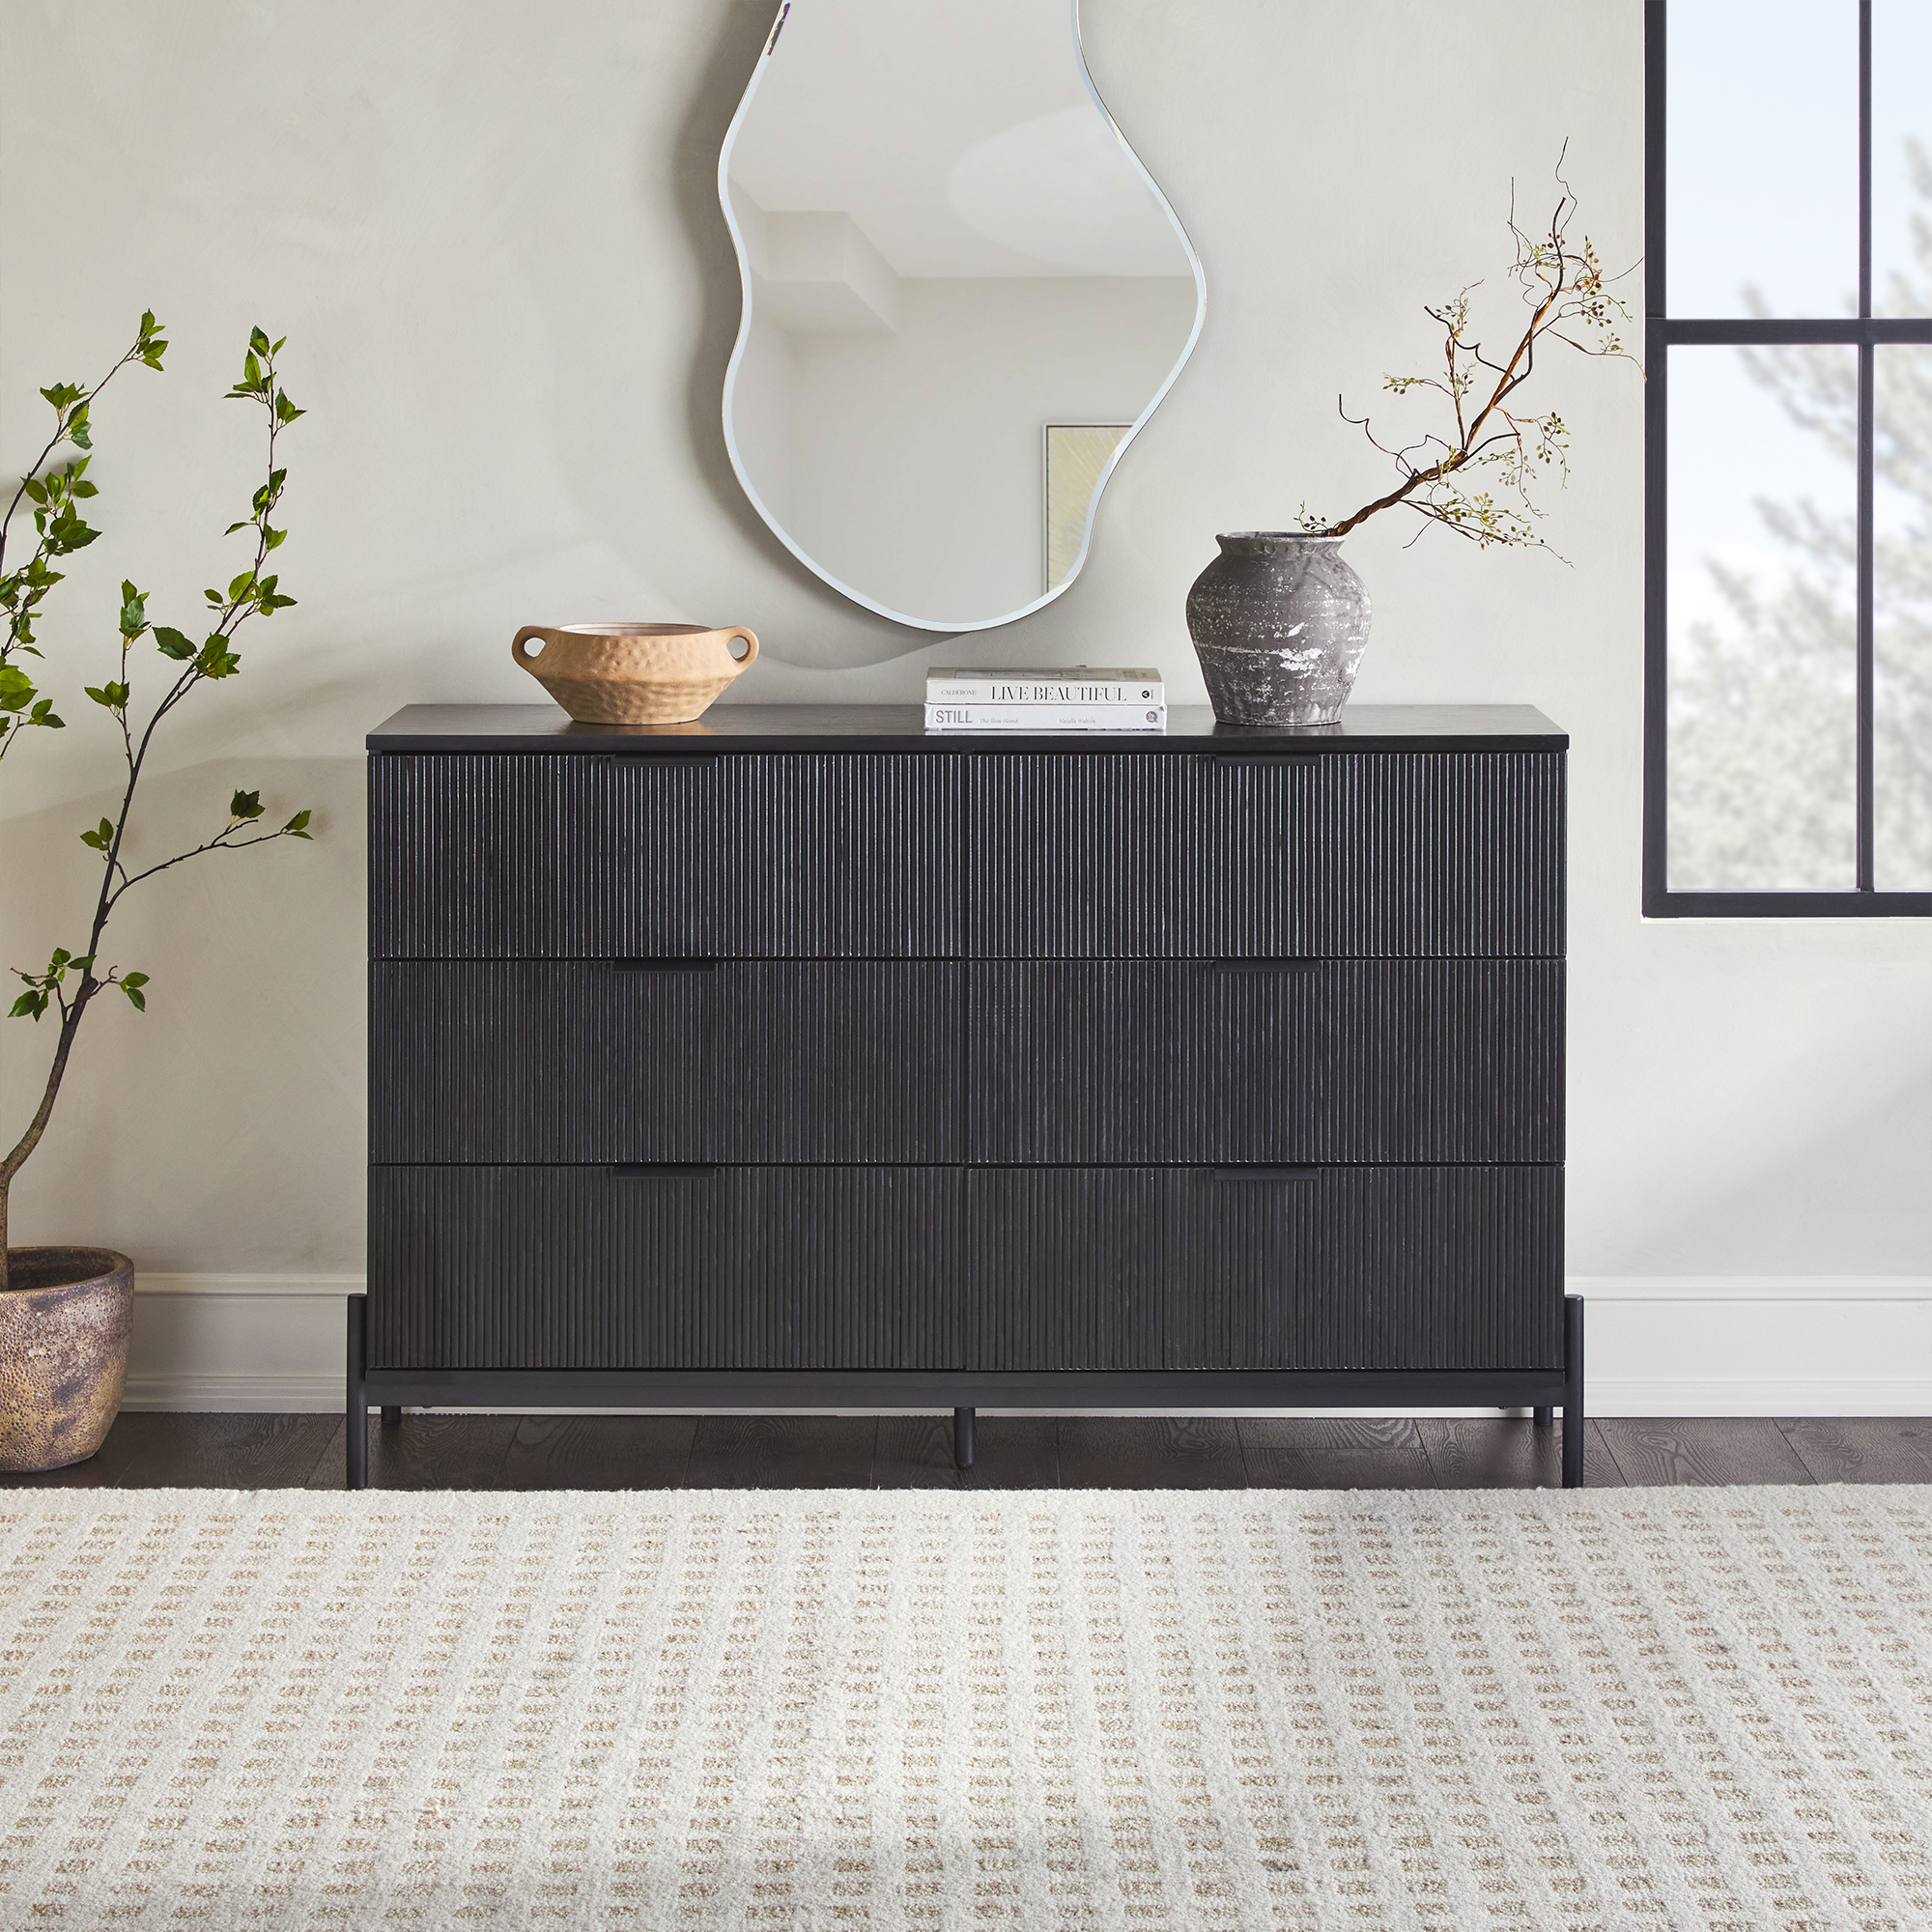 Walker Edison Mid-Century 6-Drawer Dresser with Reeded Drawer Fronts, Black - image 1 of 15